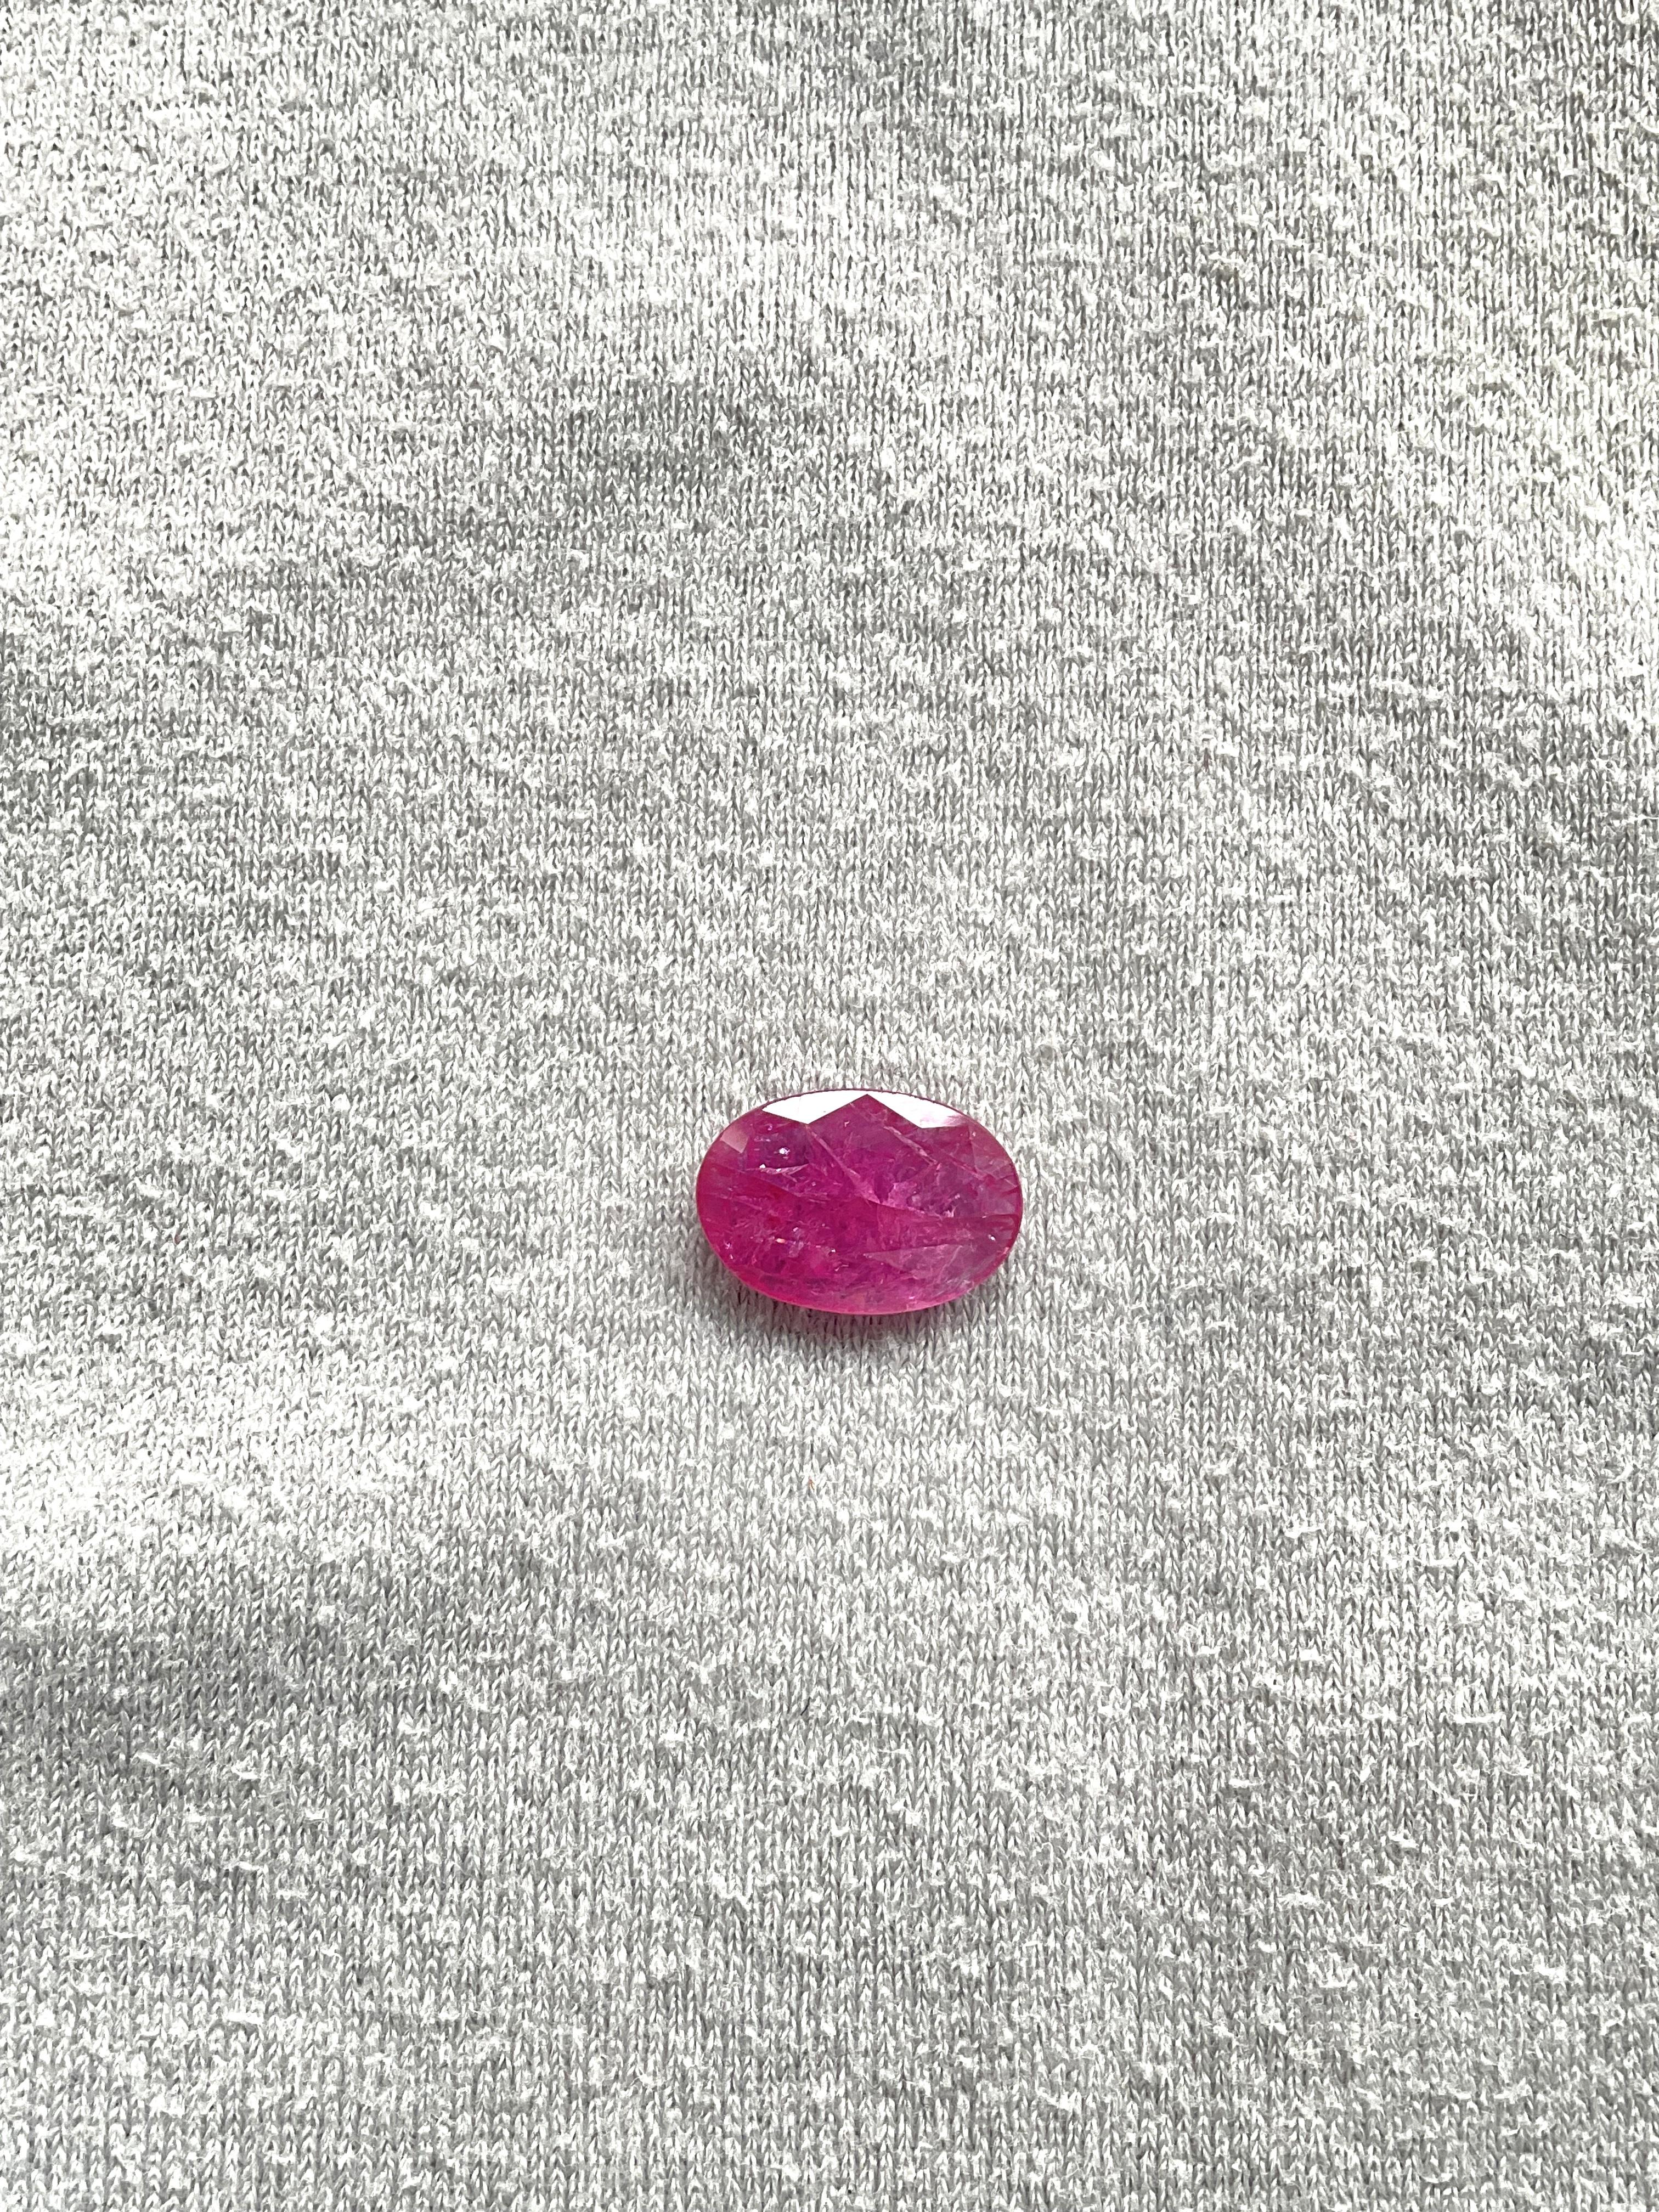 Art Deco Certified 5.27 Carats Mozambique Ruby Oval Faceted Cutstone No Heat Natural Gem For Sale